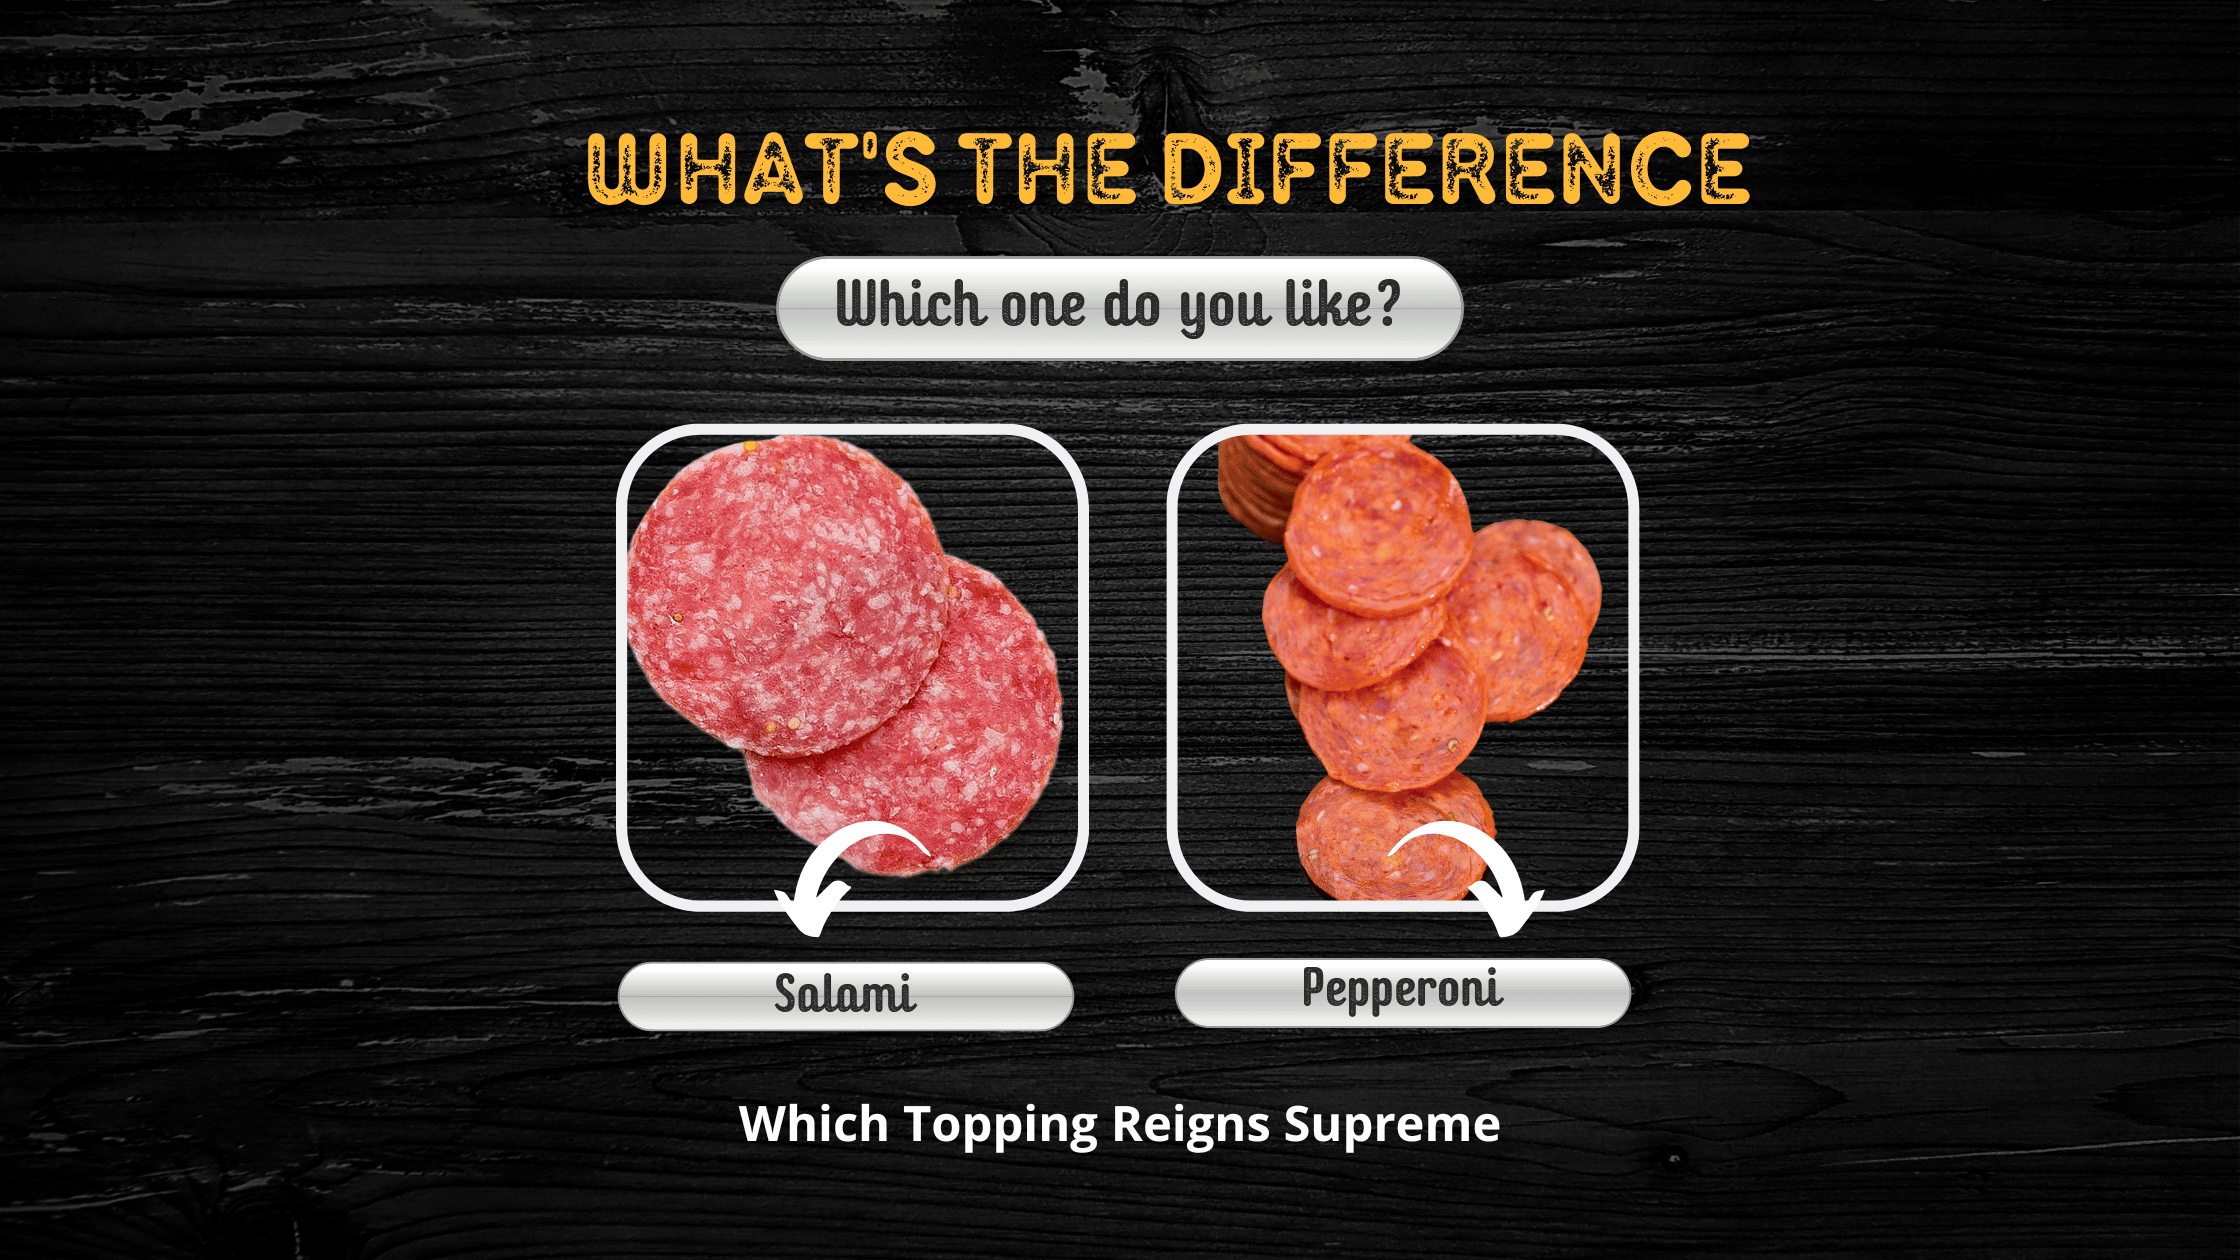 Difference between salami and pepperoni